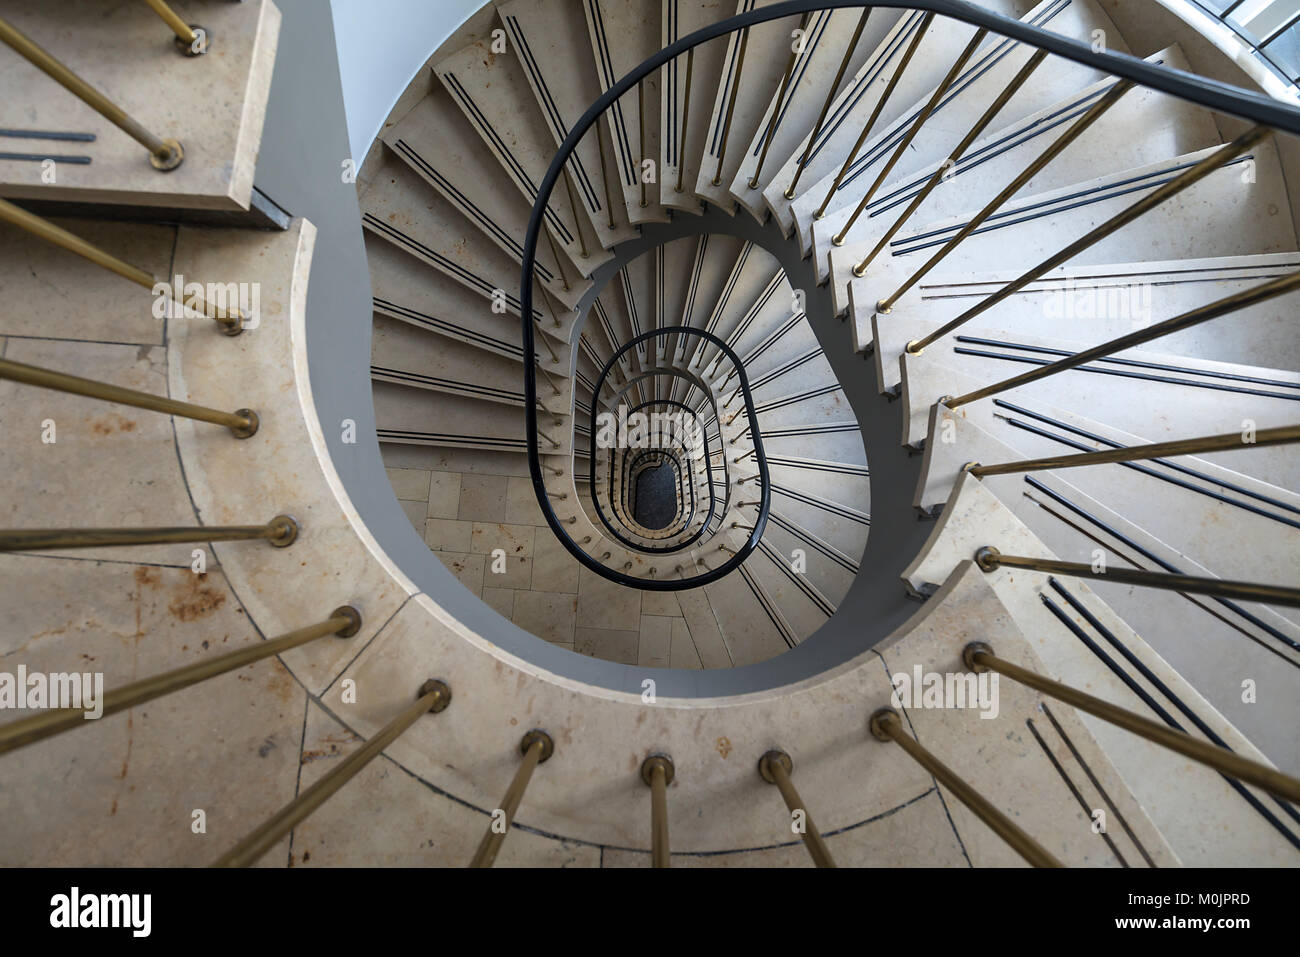 Staircase, architecture of the 1950s, Germany Stock Photo